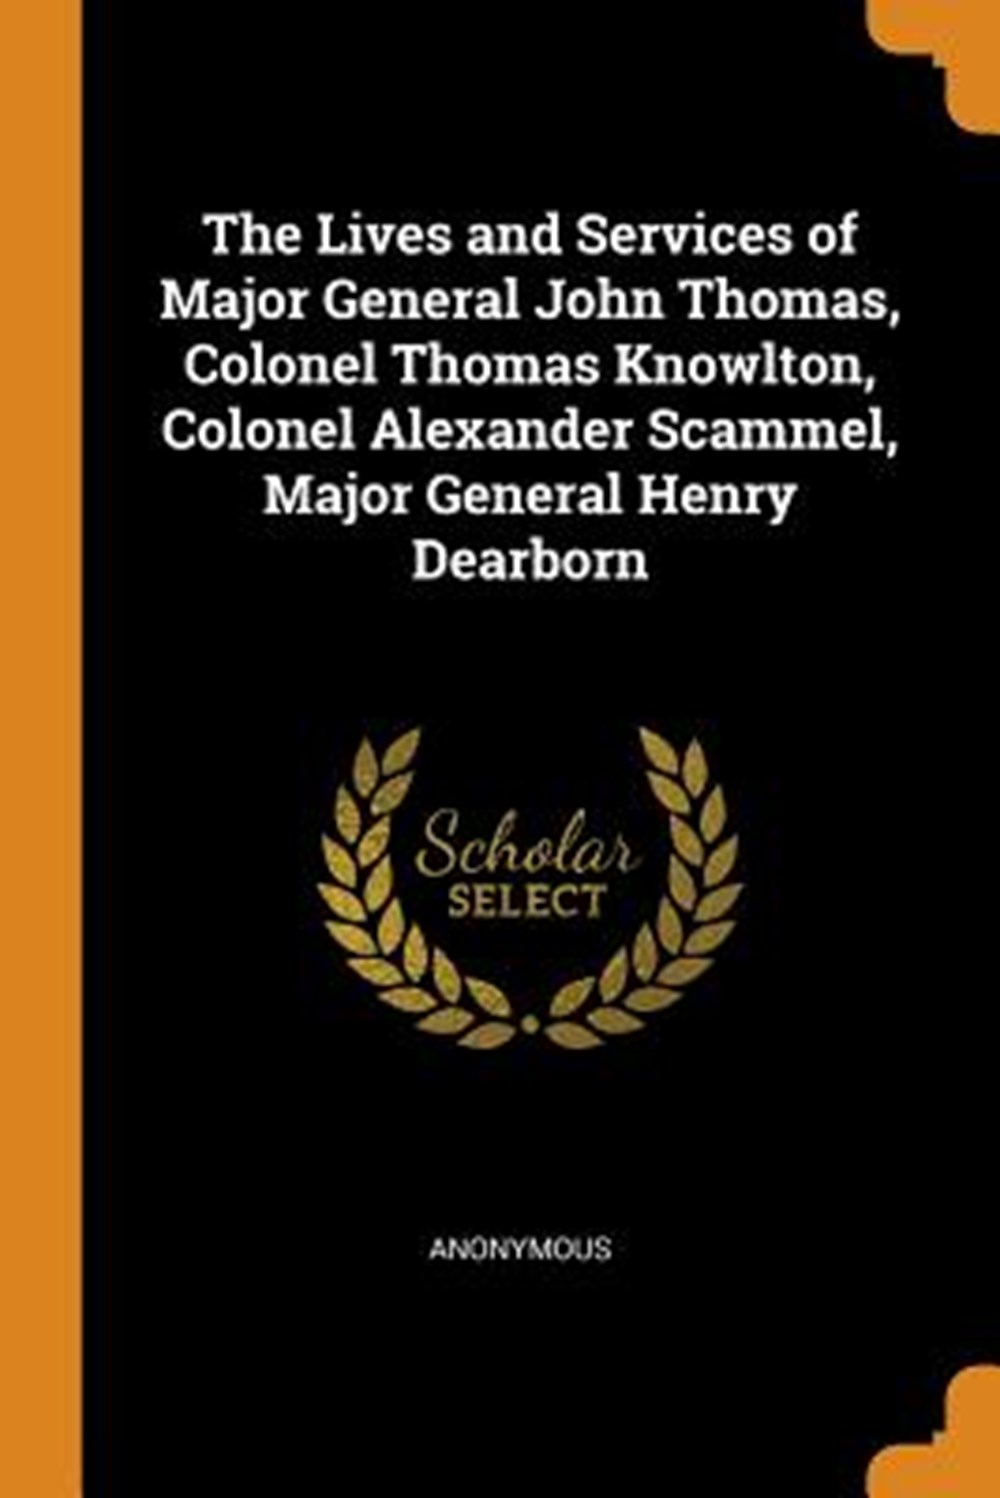 Lives and Services of Major General John Thomas, Colonel Thomas Knowlton, Colonel Alexander Scammel,